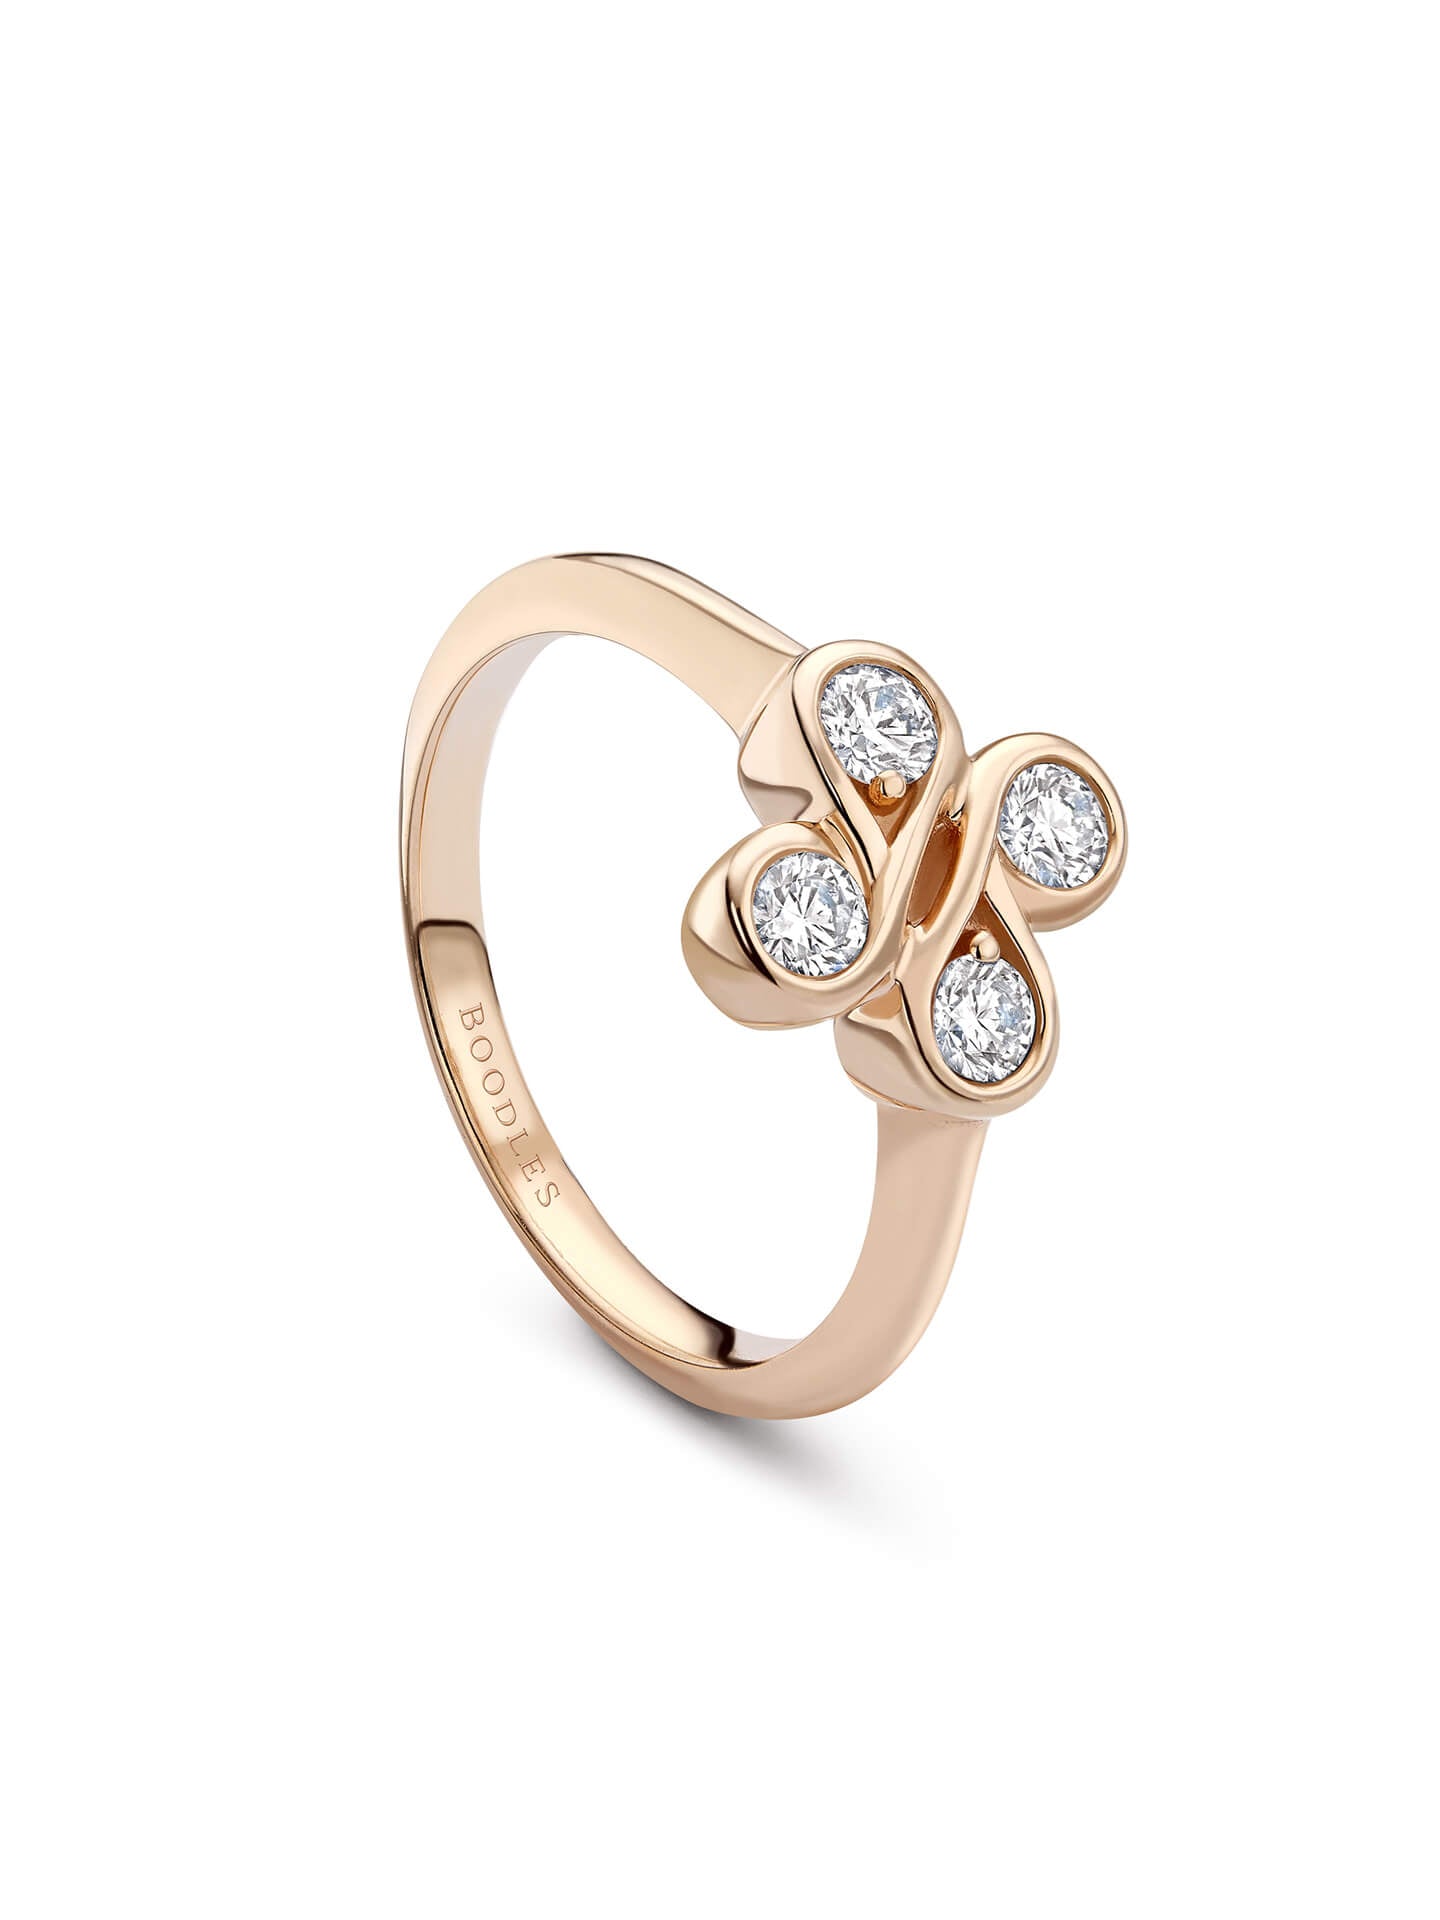 Be Boodles Classic Motif Rose Gold Ring | Boodles